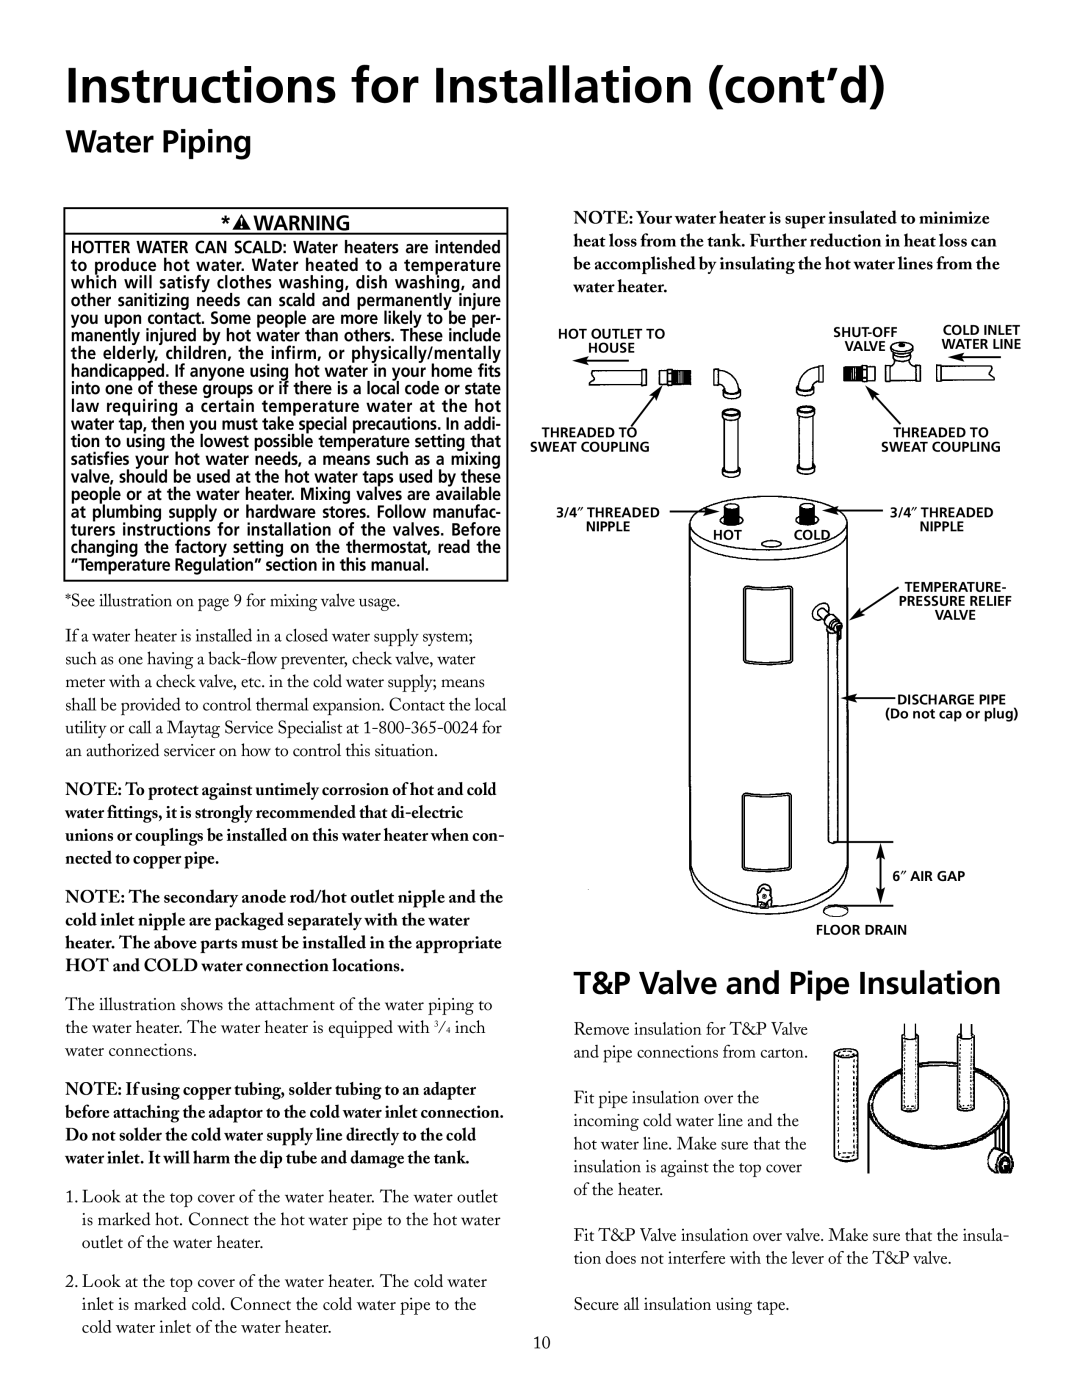 Maytag HRX52DERS, HRX30DERT, HRX52DERT Water Piping, T&P Valve and Pipe Insulation, Instructions for Installation cont’d 